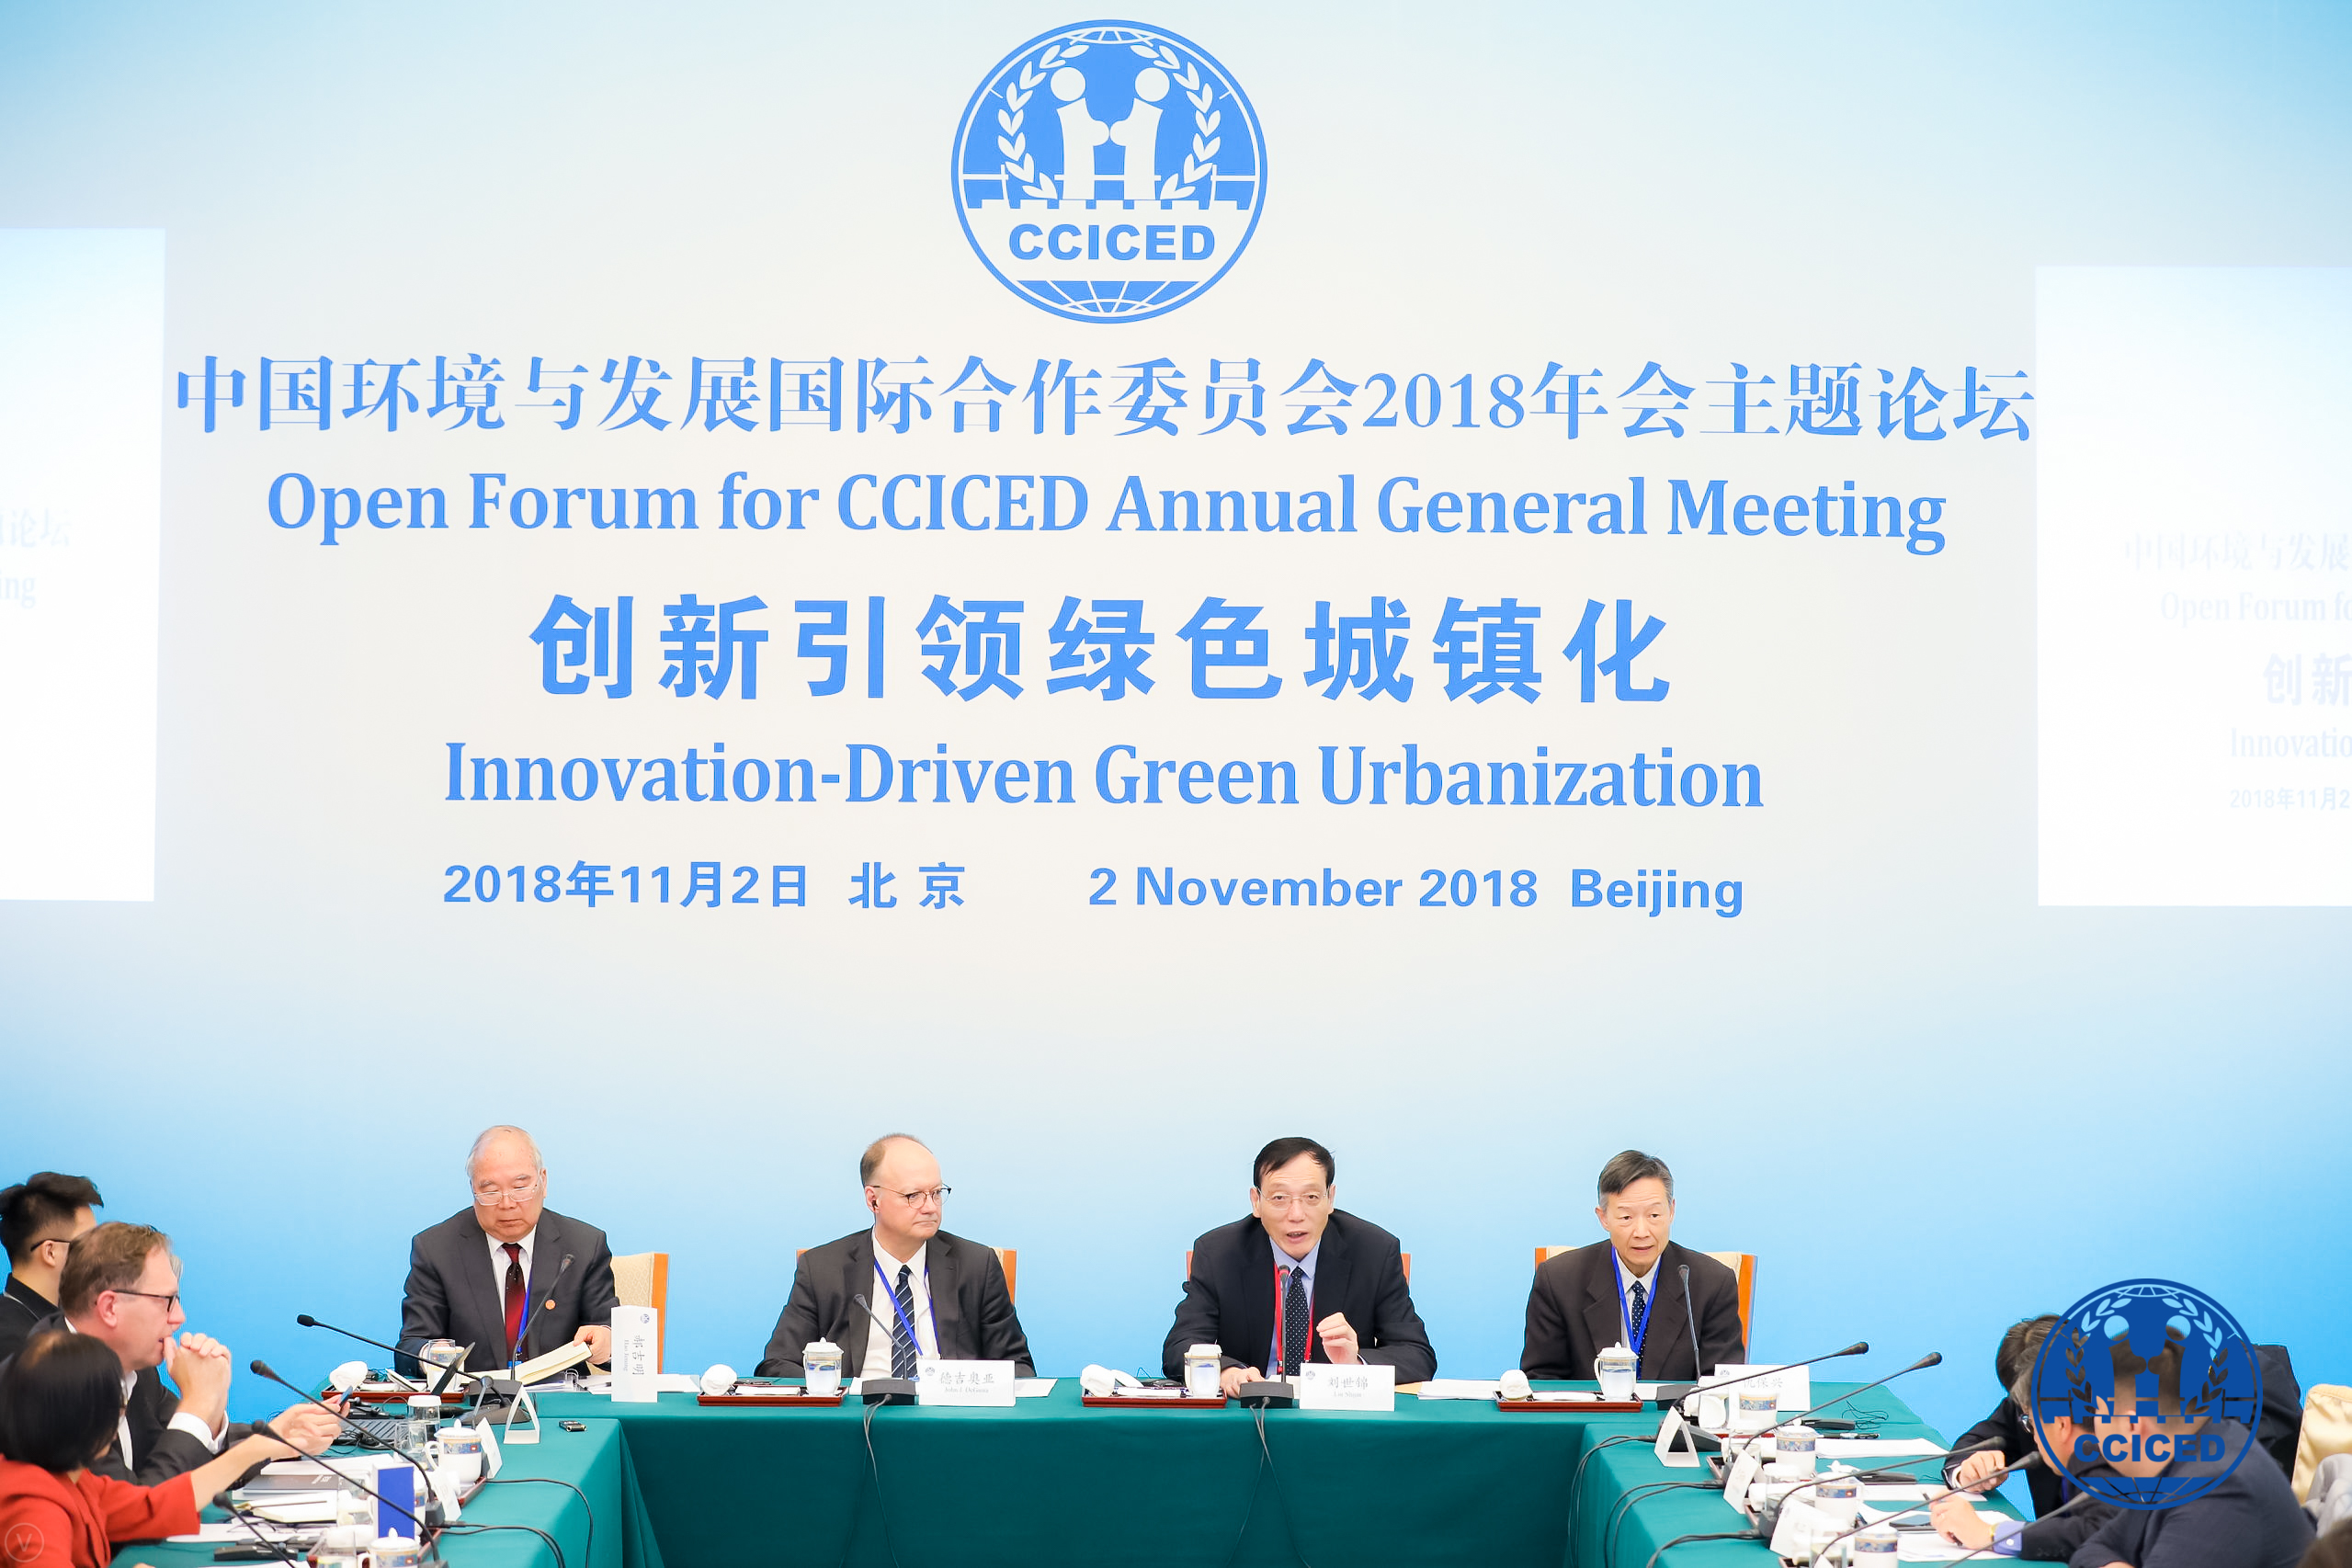 CCICED 2018 AGM Open Forum on Innovation-Driven Green Urbanization successfully convened